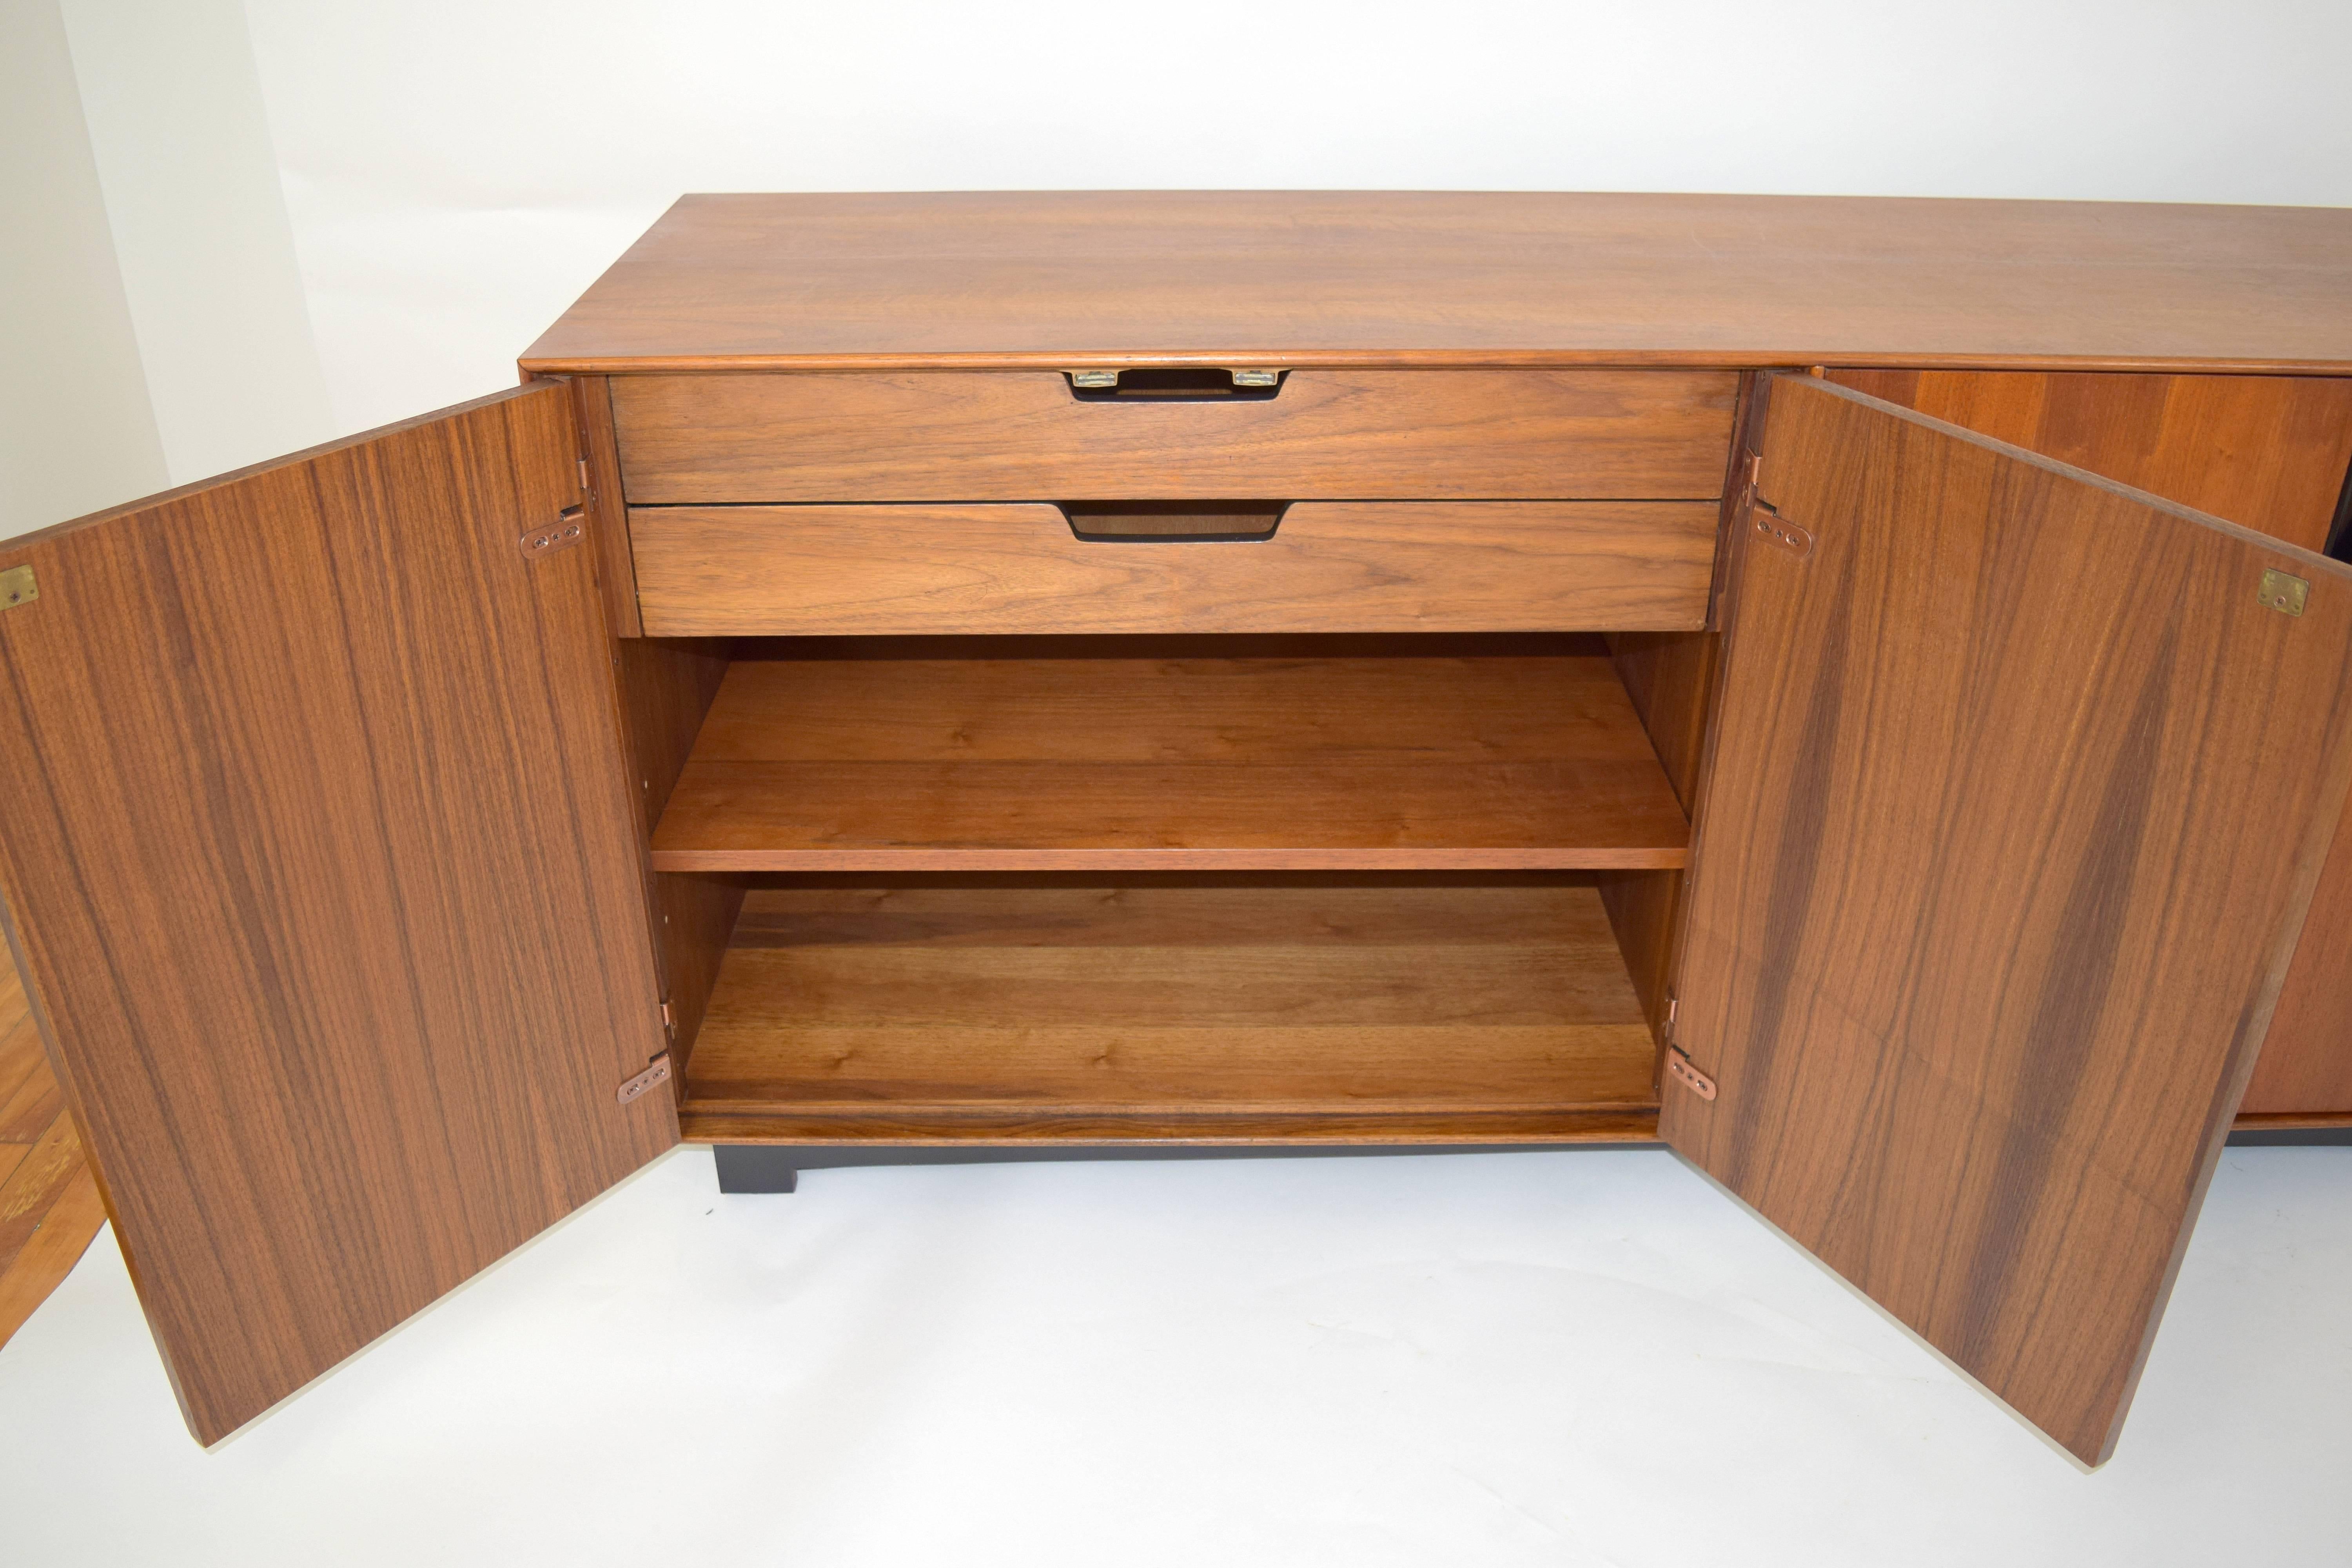 John Kapel Walnut Credenza for Glenn of California In Excellent Condition For Sale In Chicago, IL